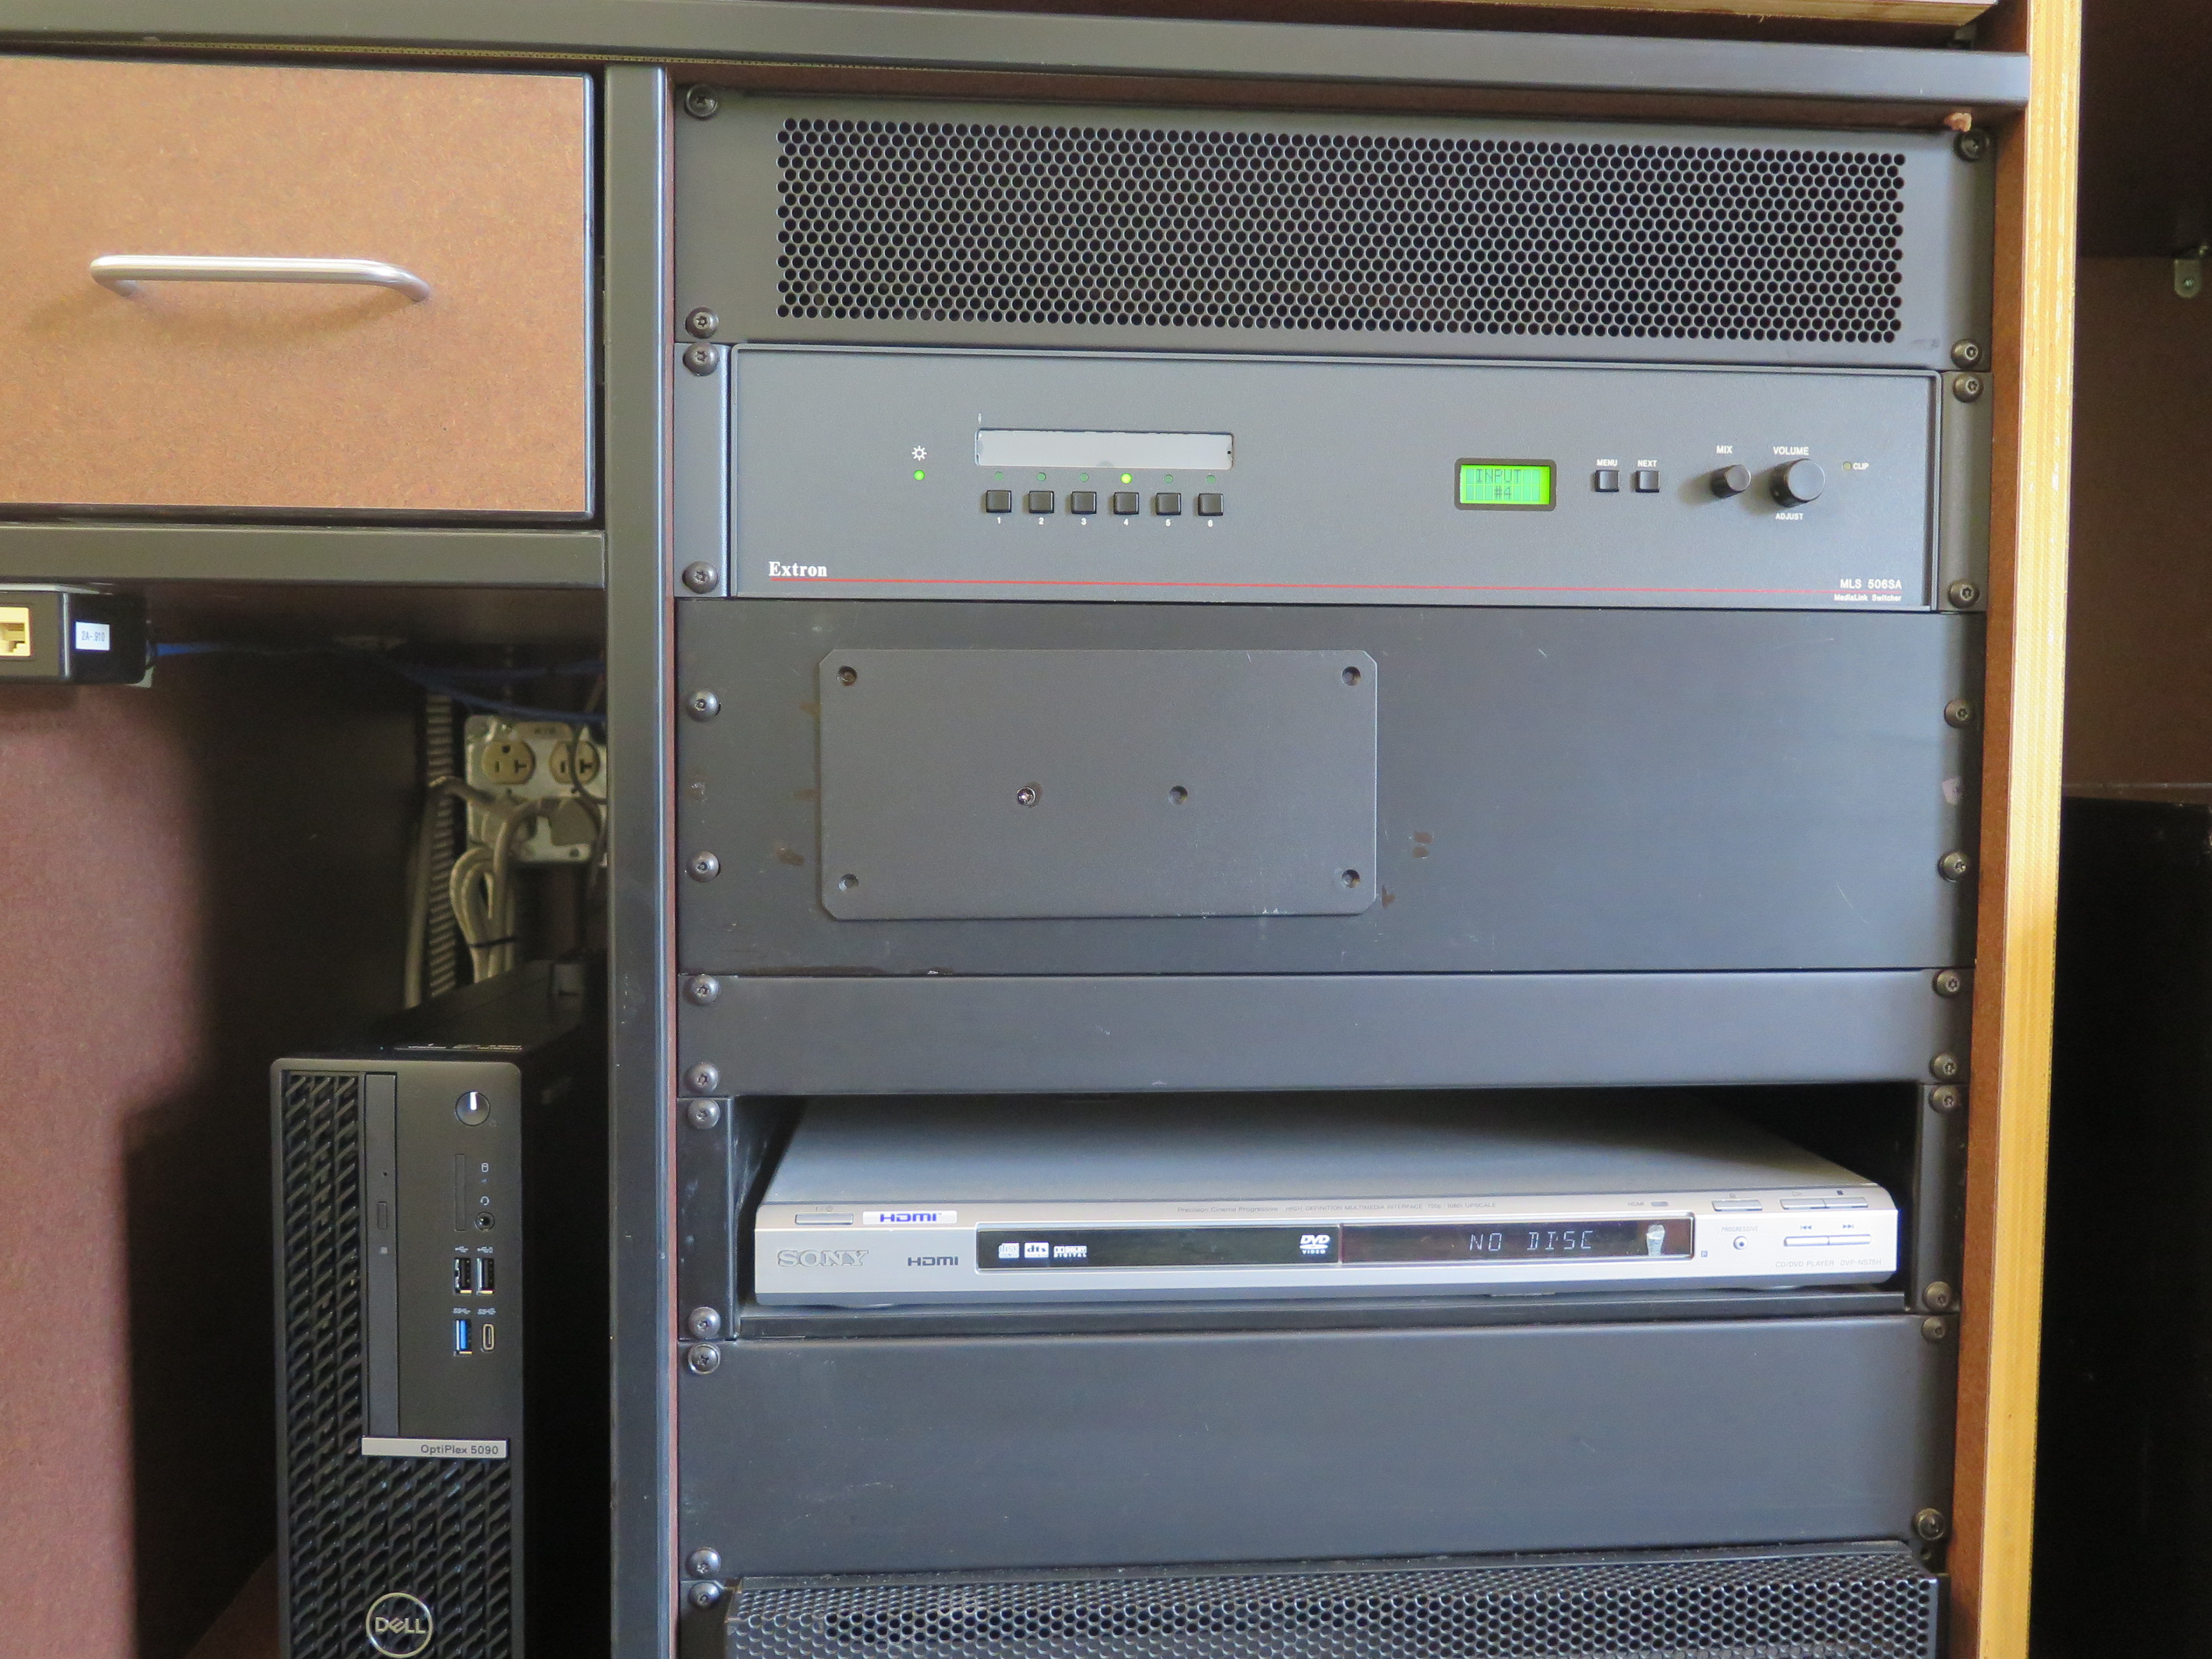 Front of Equipment rack showing AV Switcher. Below that is the DVD Player. To the left is the compartment with the Dell Computer CPU.